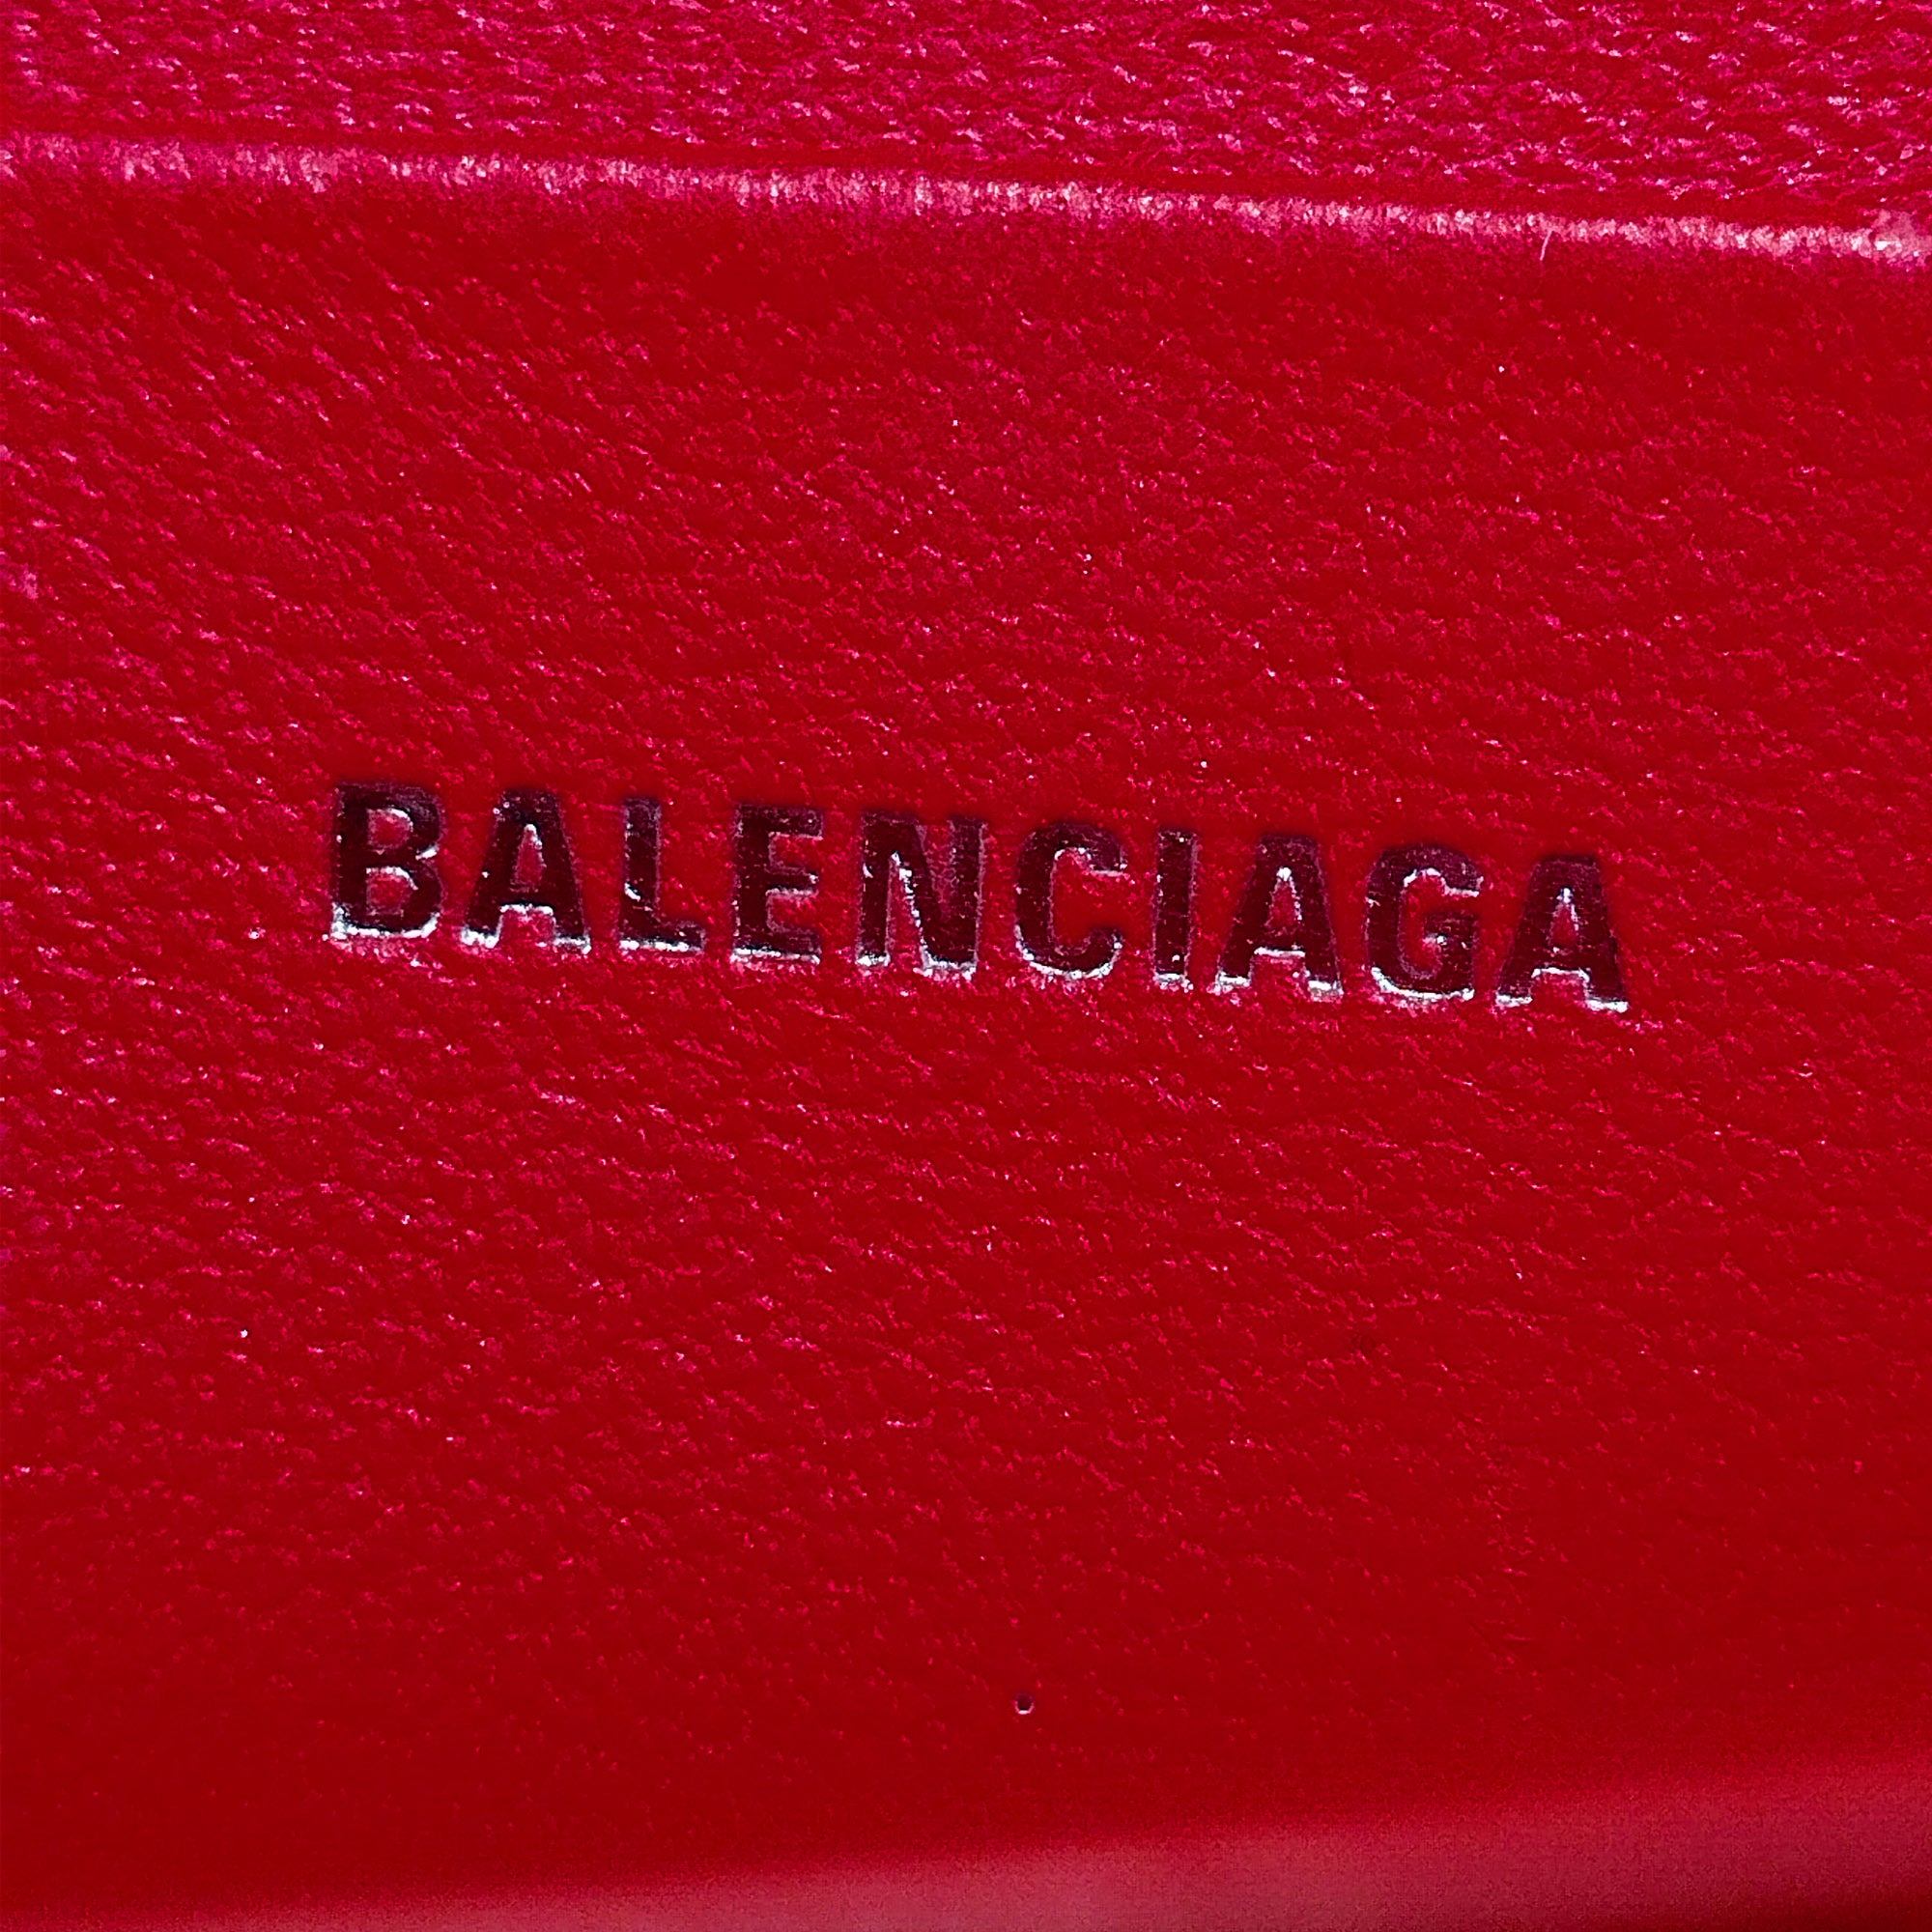 Hourglass leather handbag Balenciaga Red in Leather - 34197350